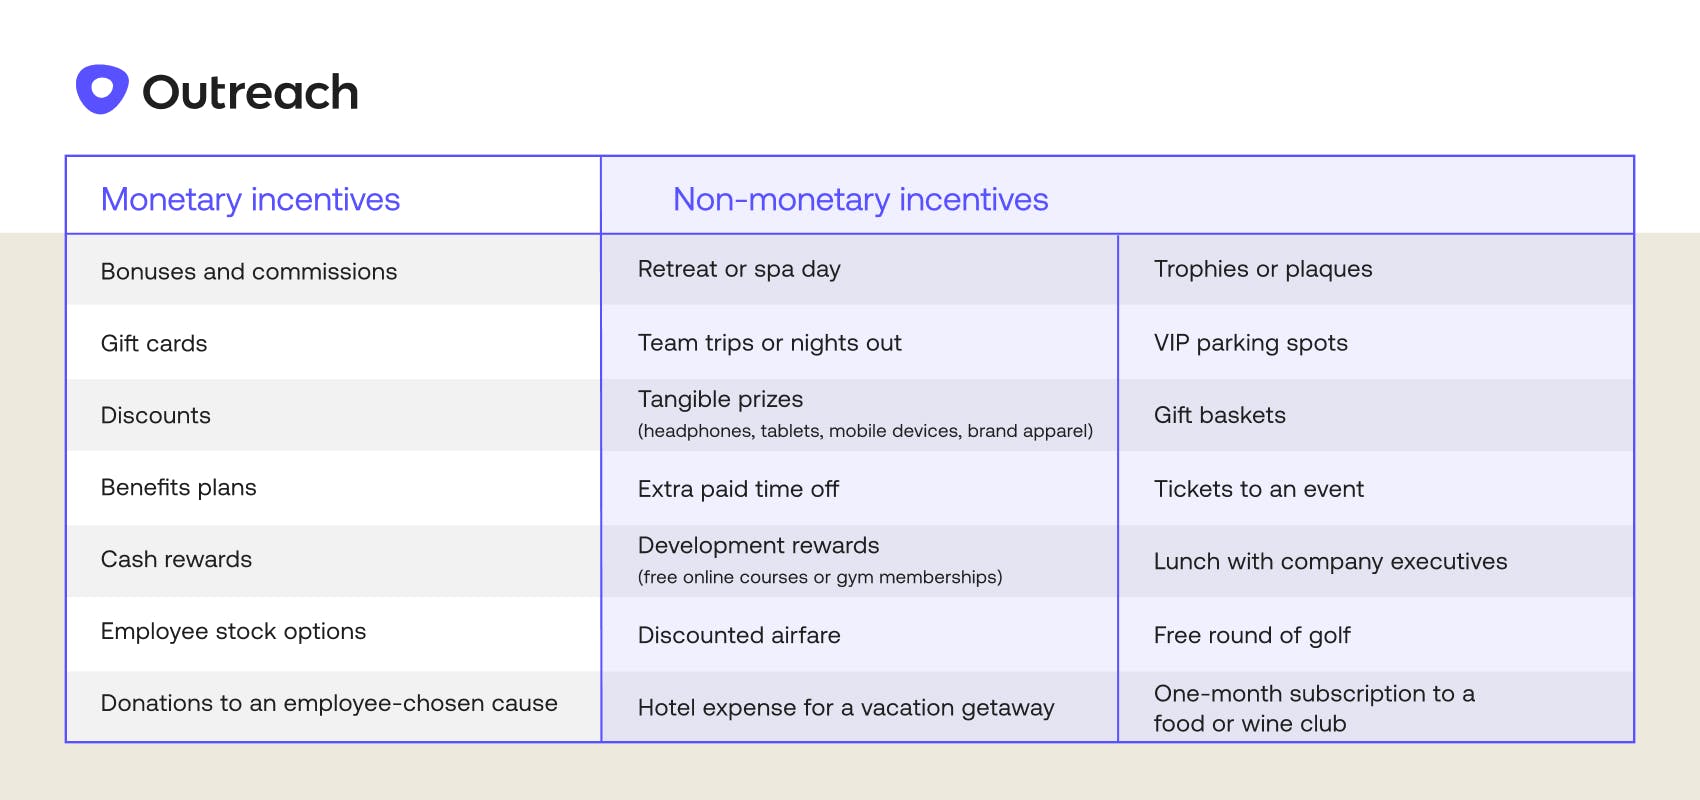 Graphic summarizing the monetary and non-monetary sales incentives listed in the article.